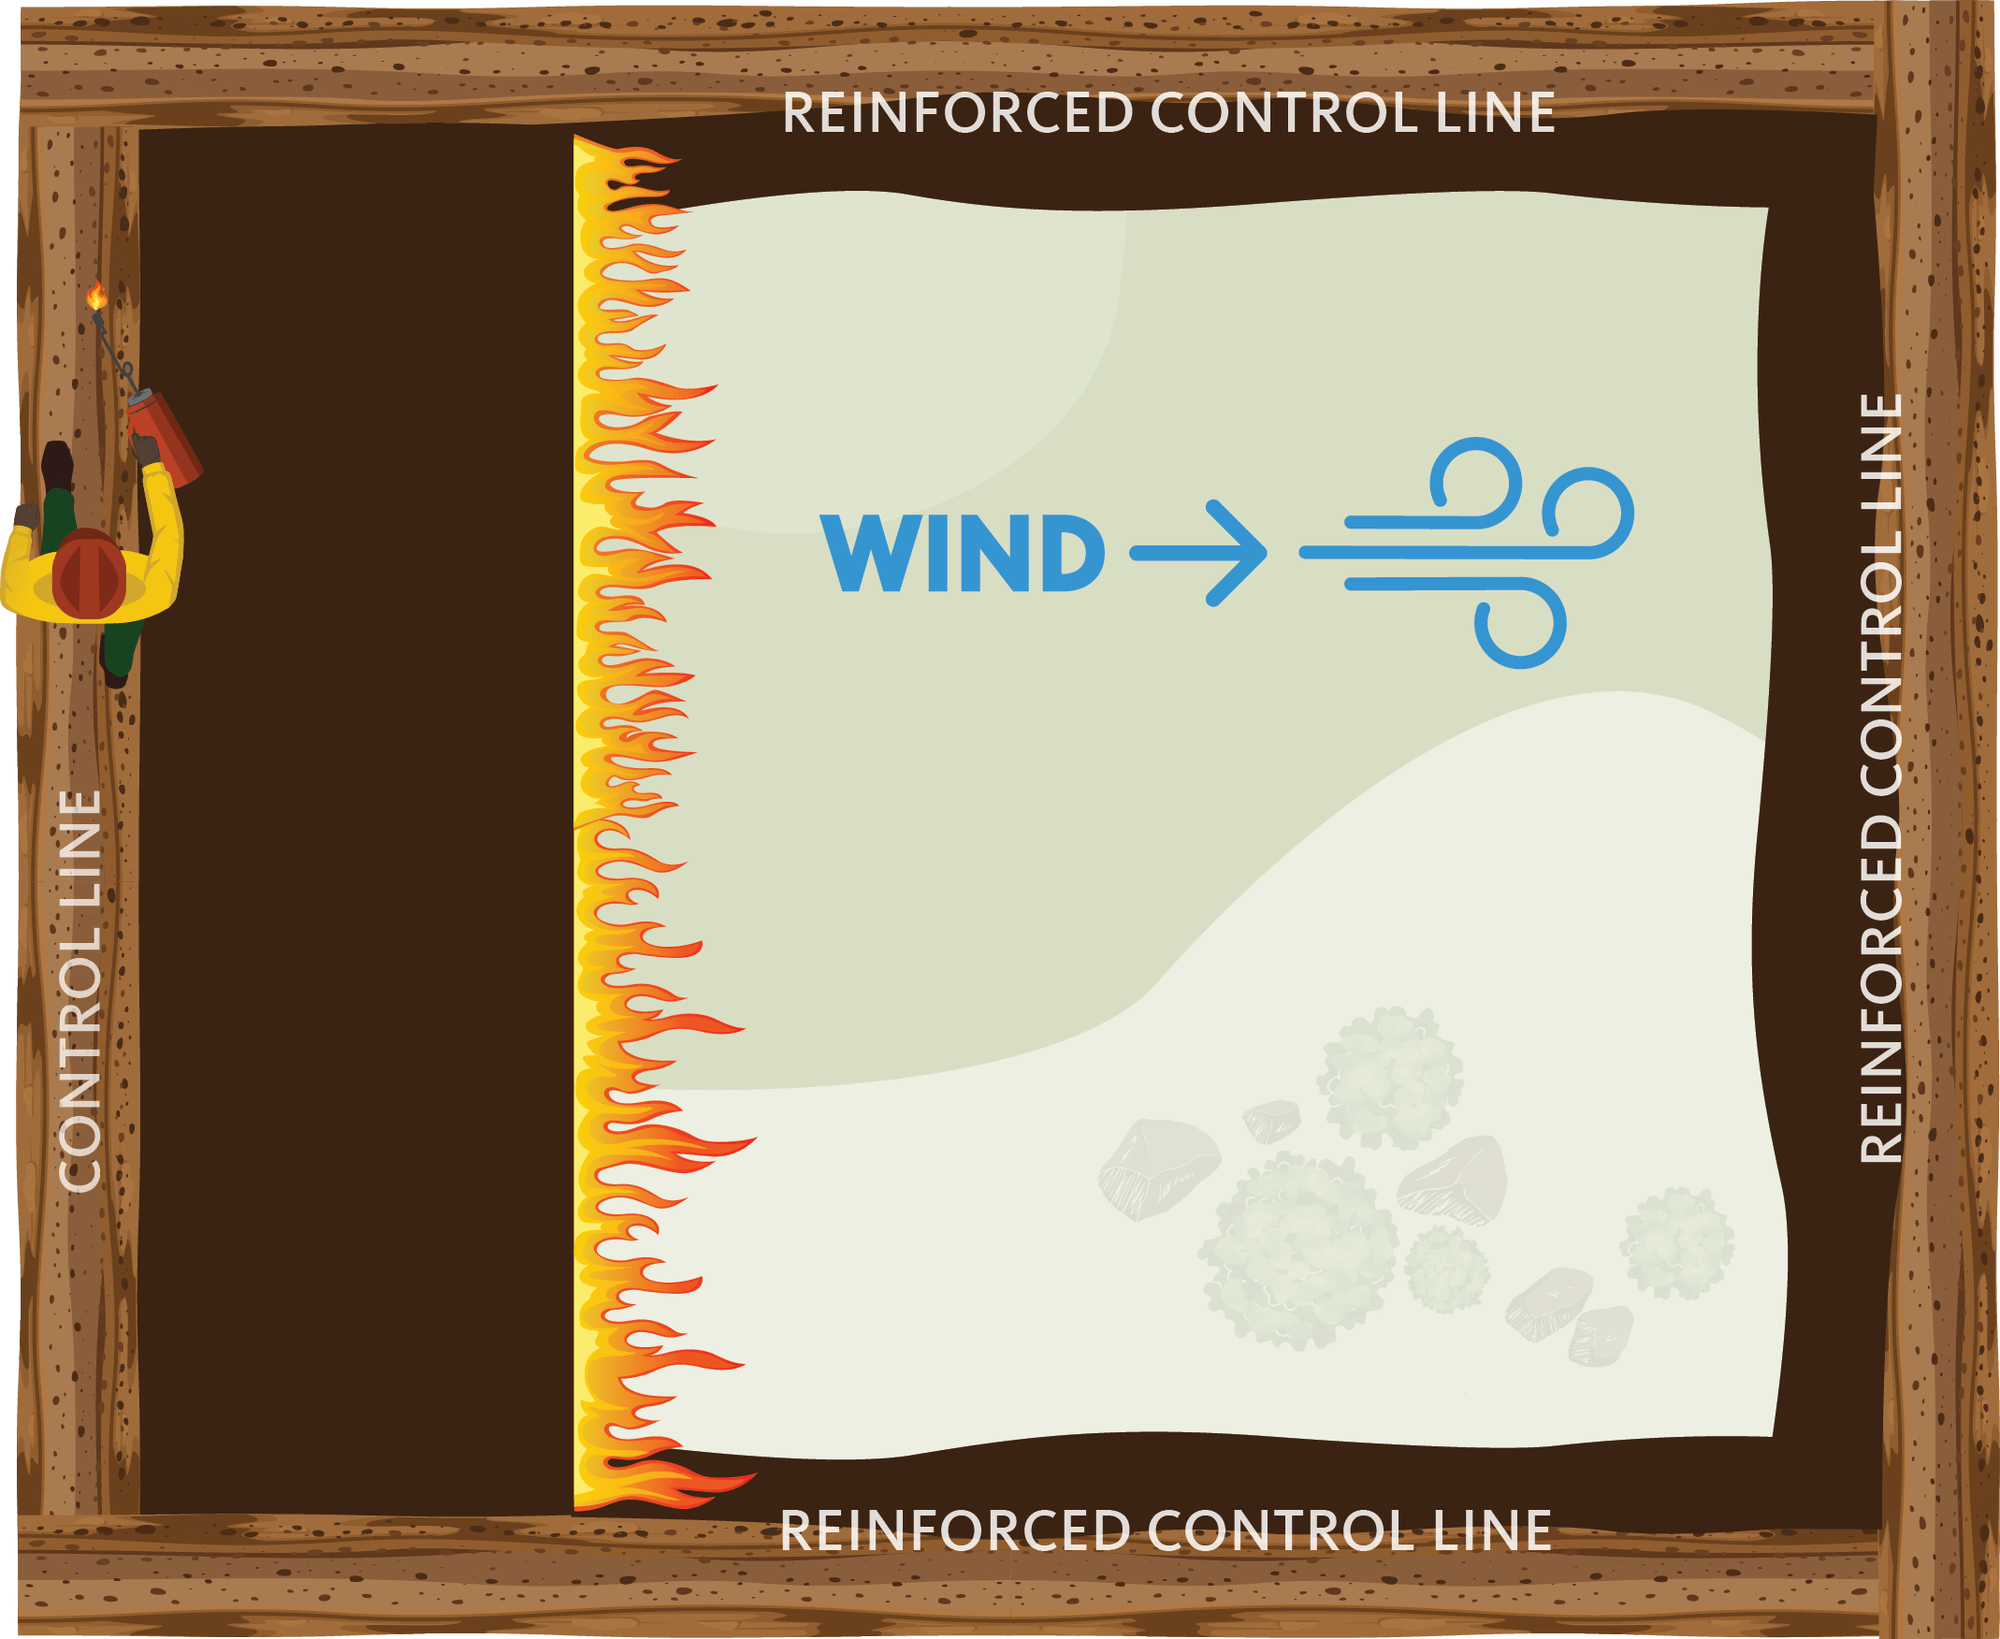 fire line flows in the direction of wind